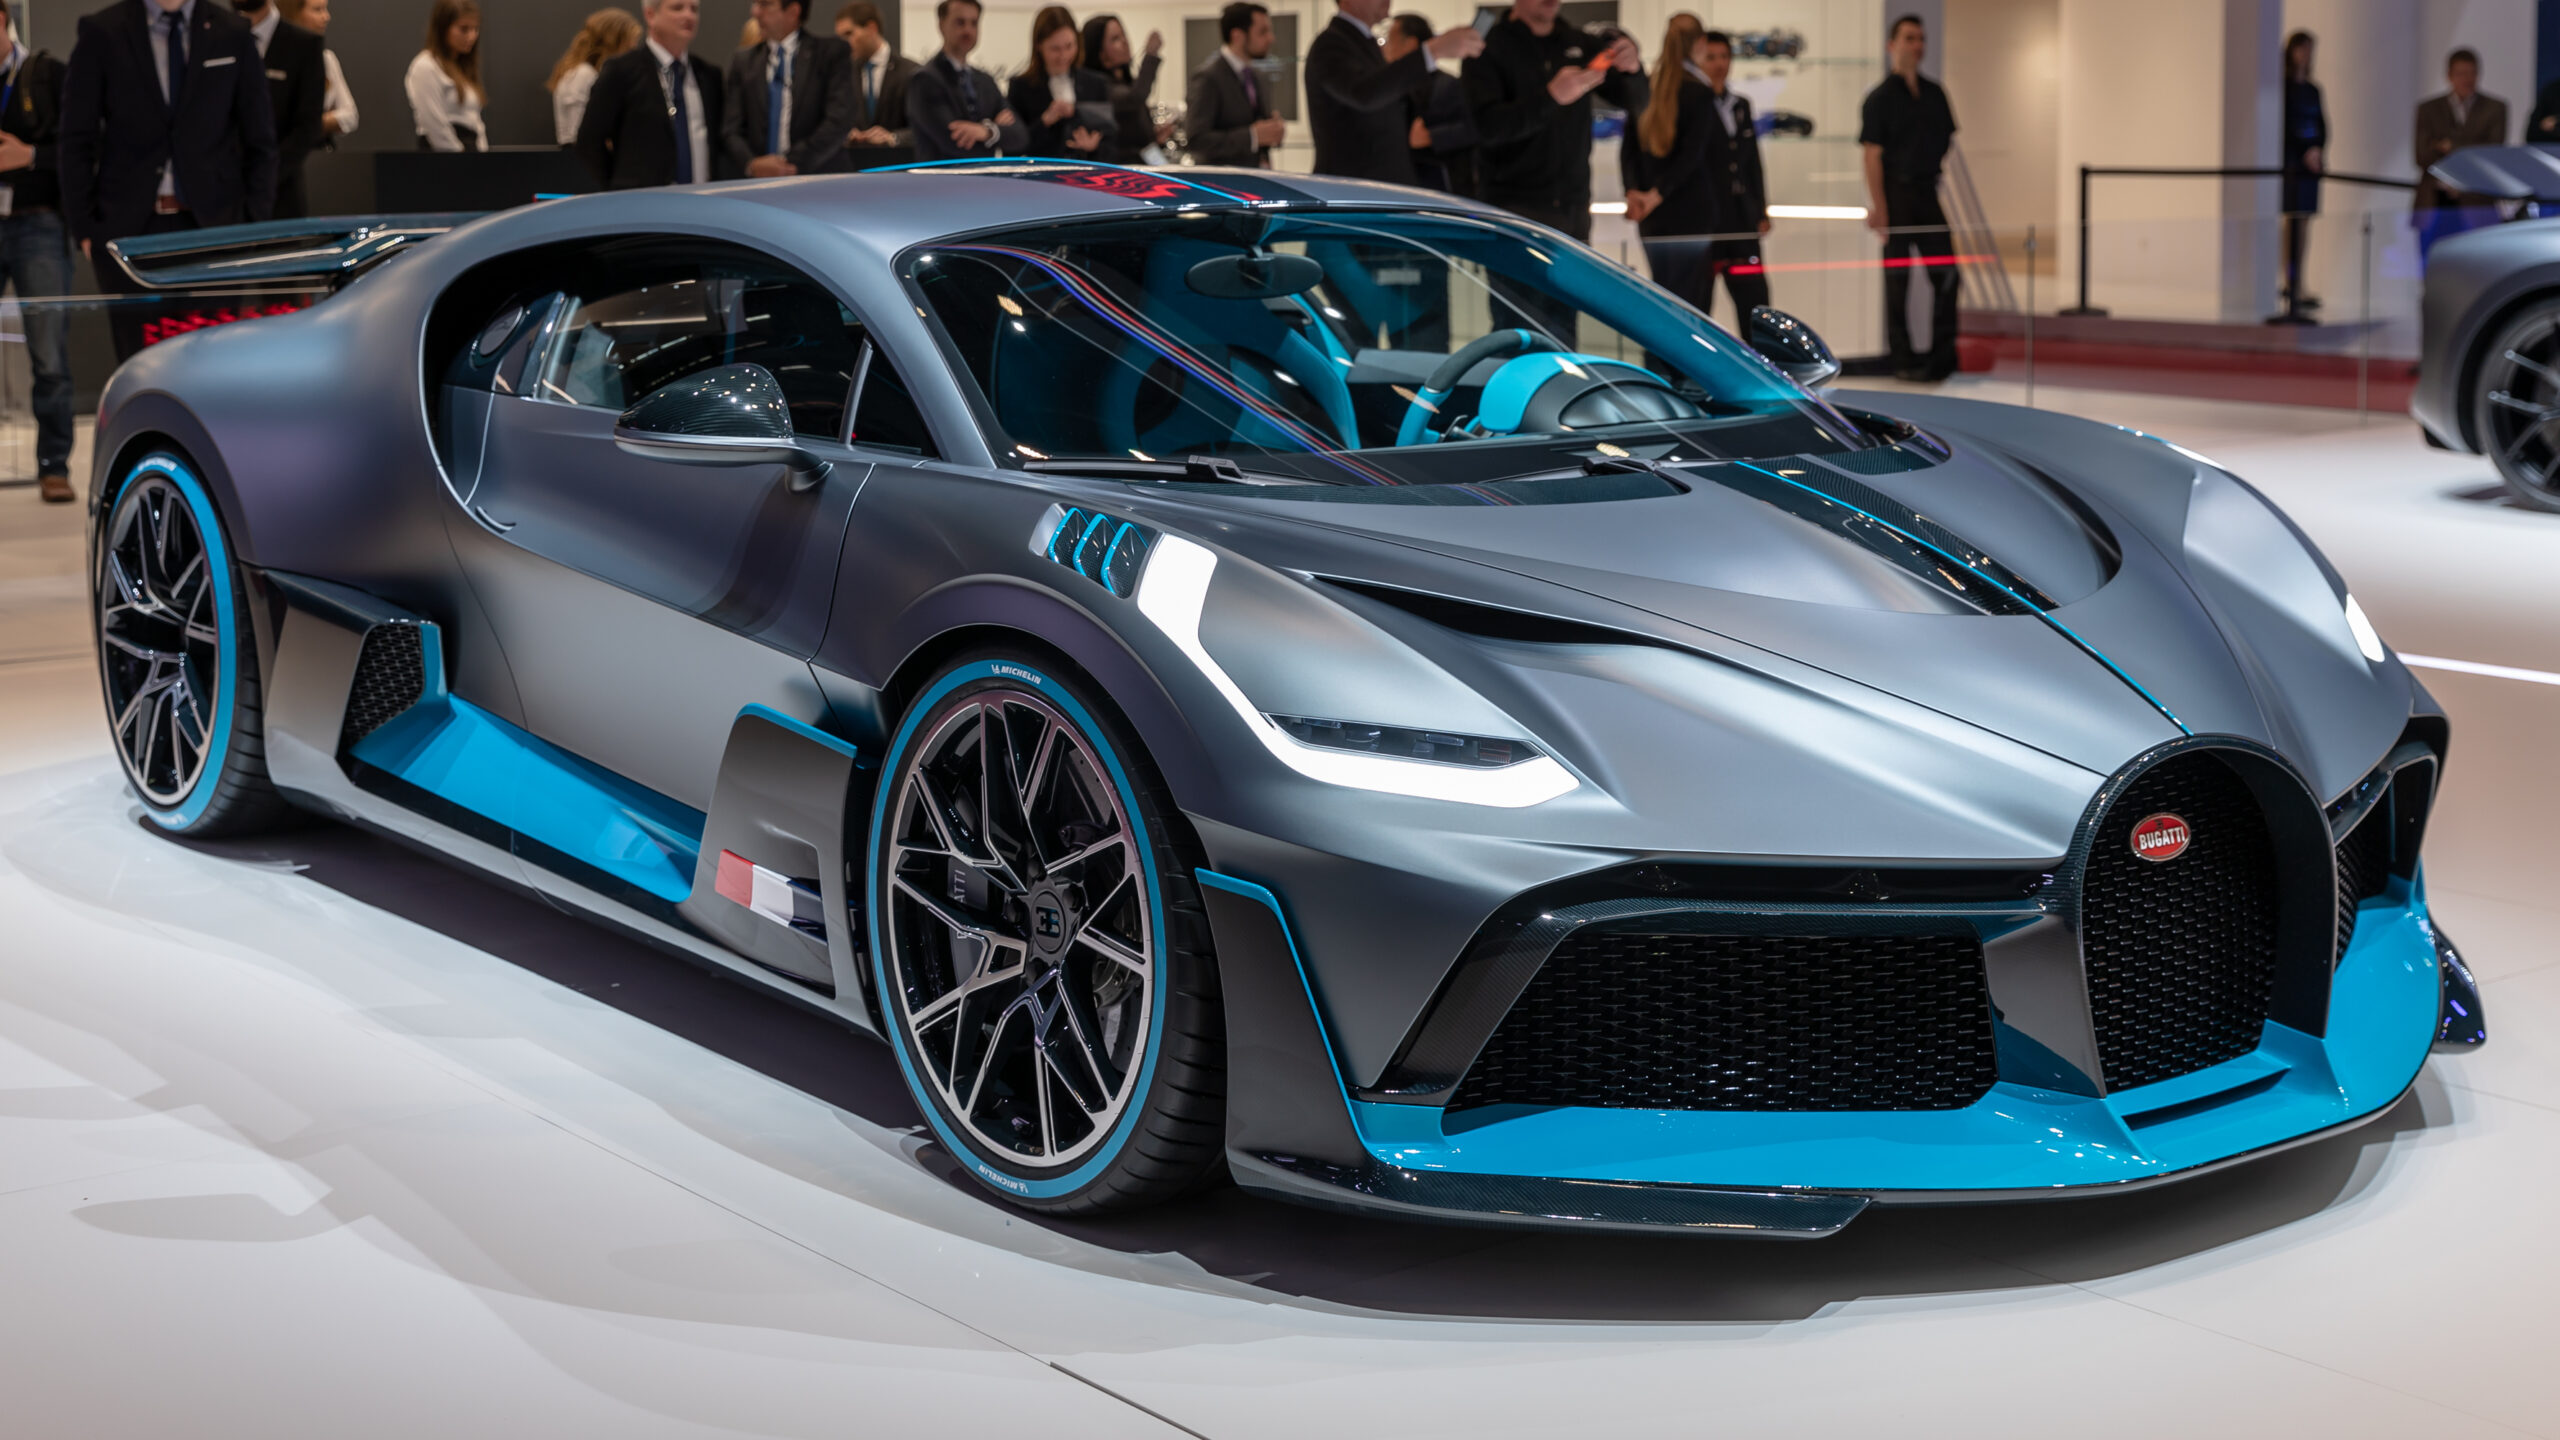 Who Owns the World’s Most Expensive Car